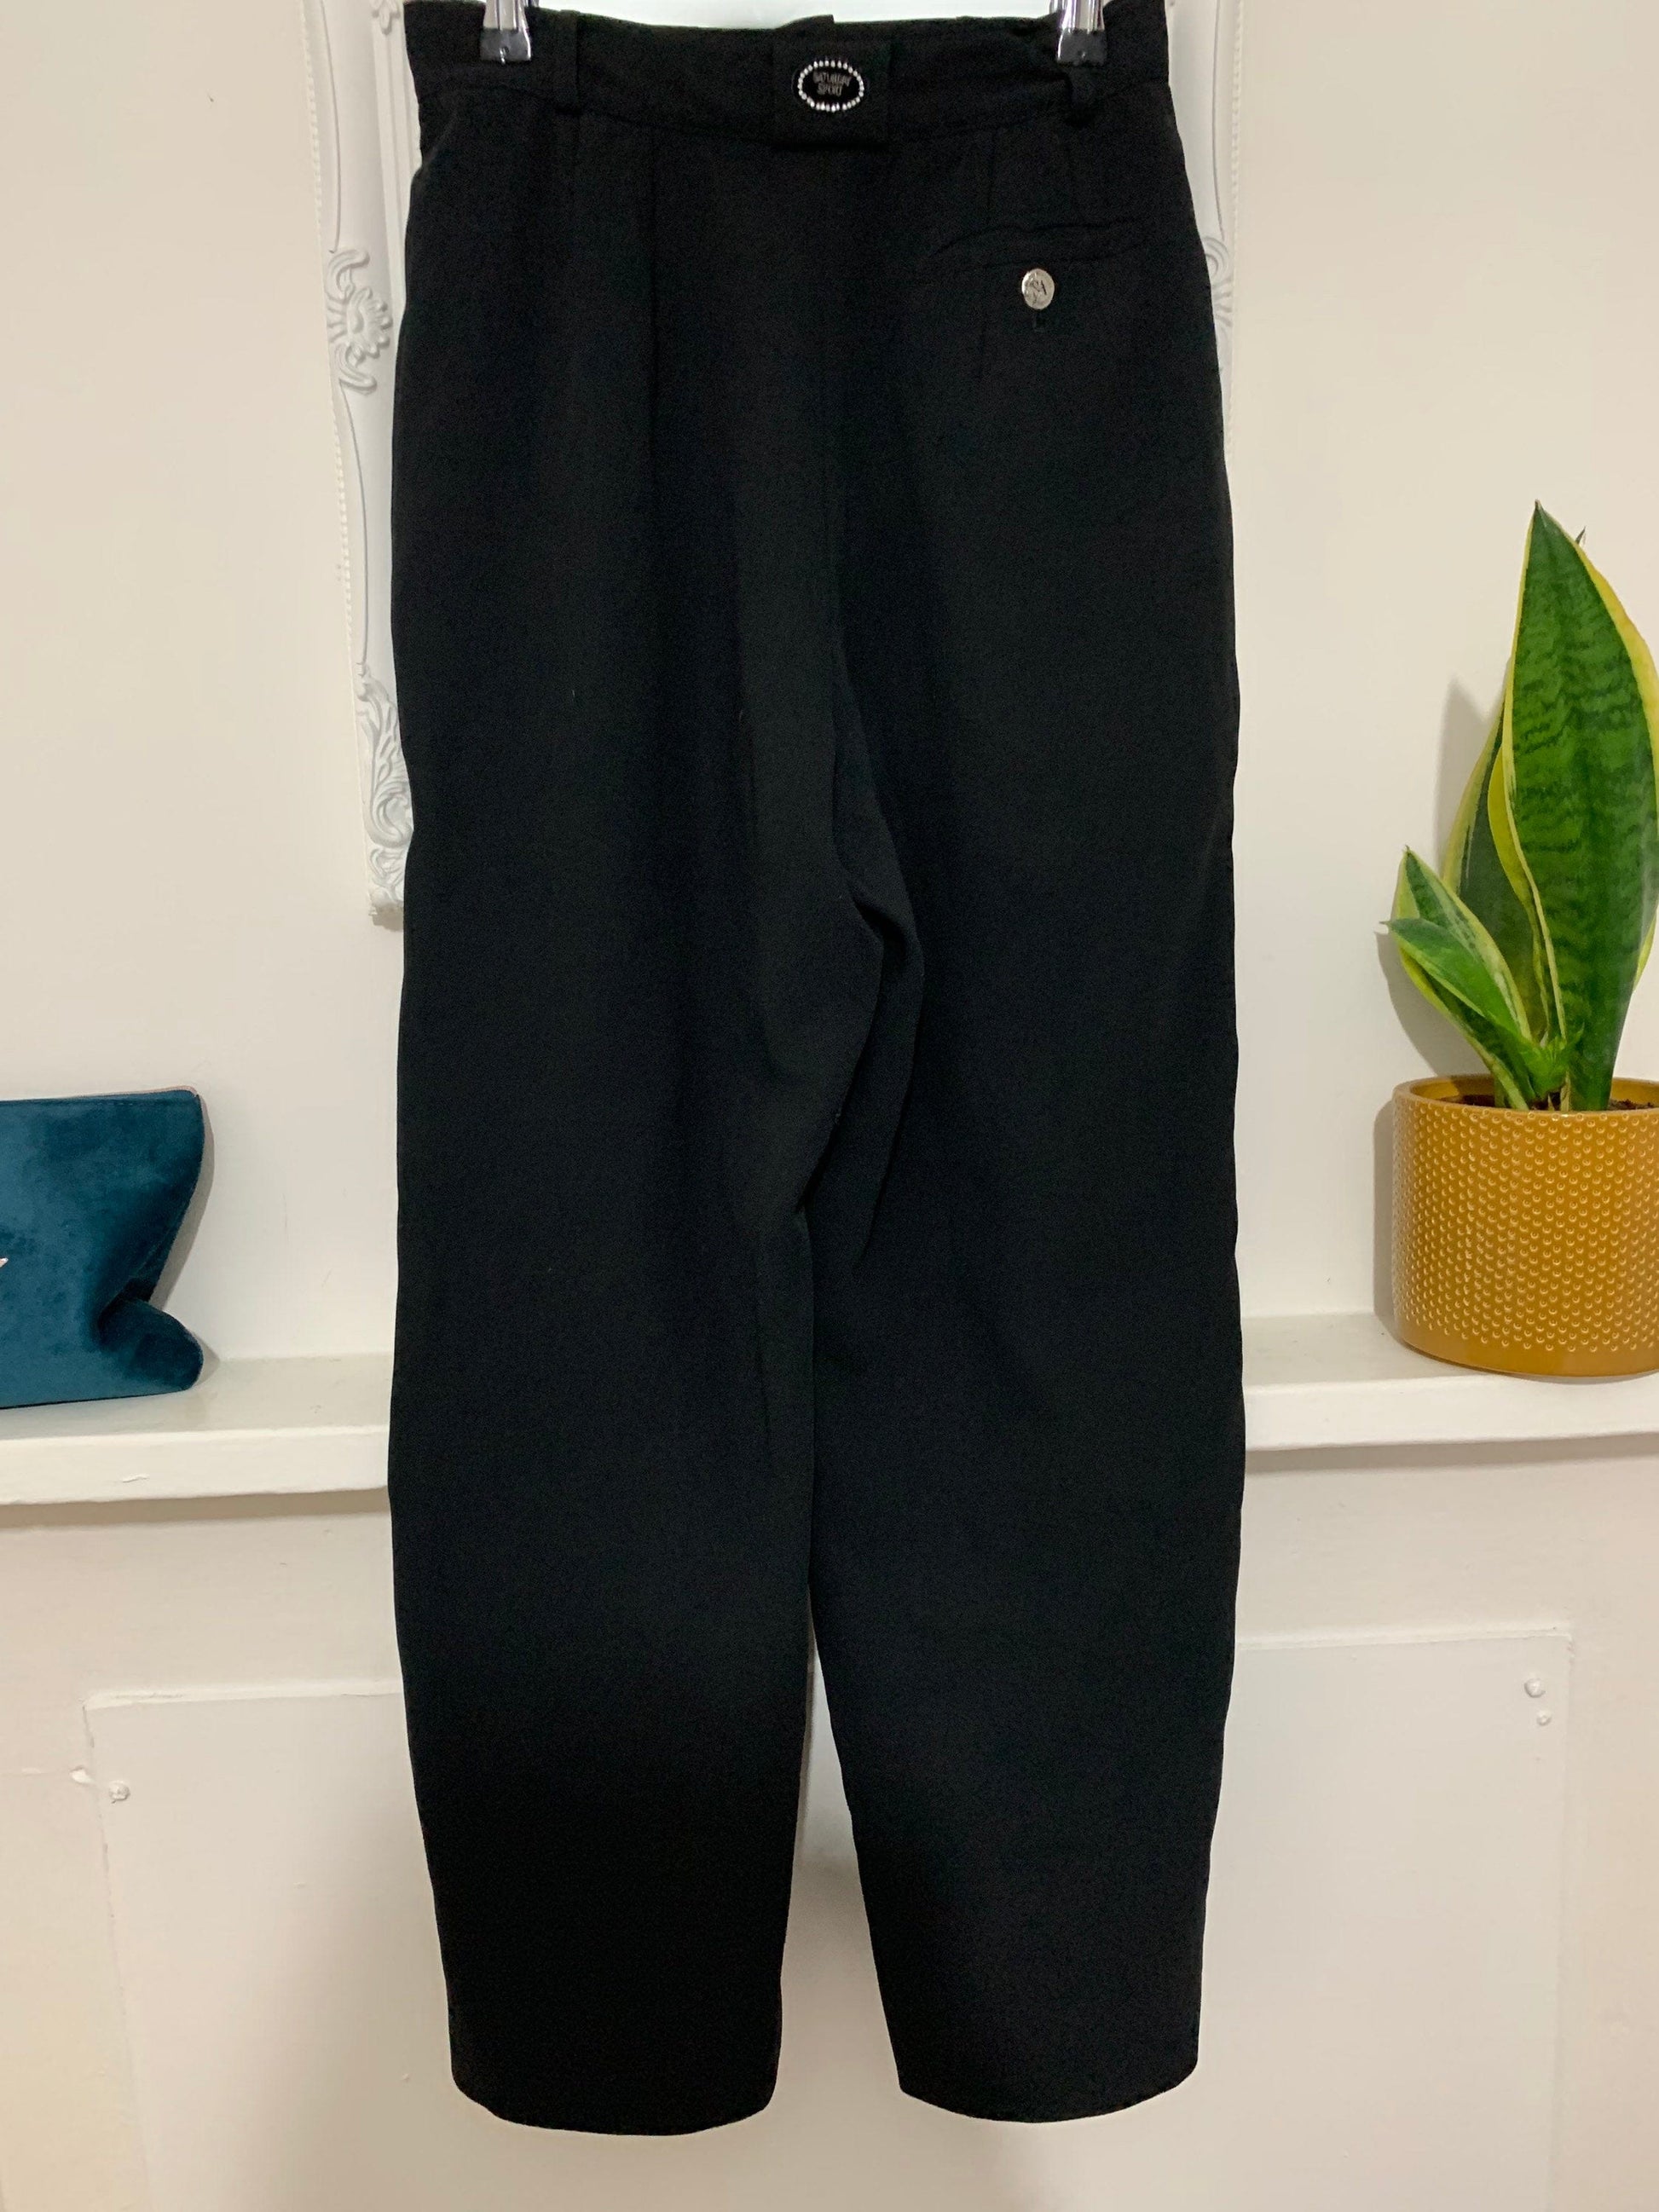 Vintage High waisted Trousers - Navy Blue - vintage clothing